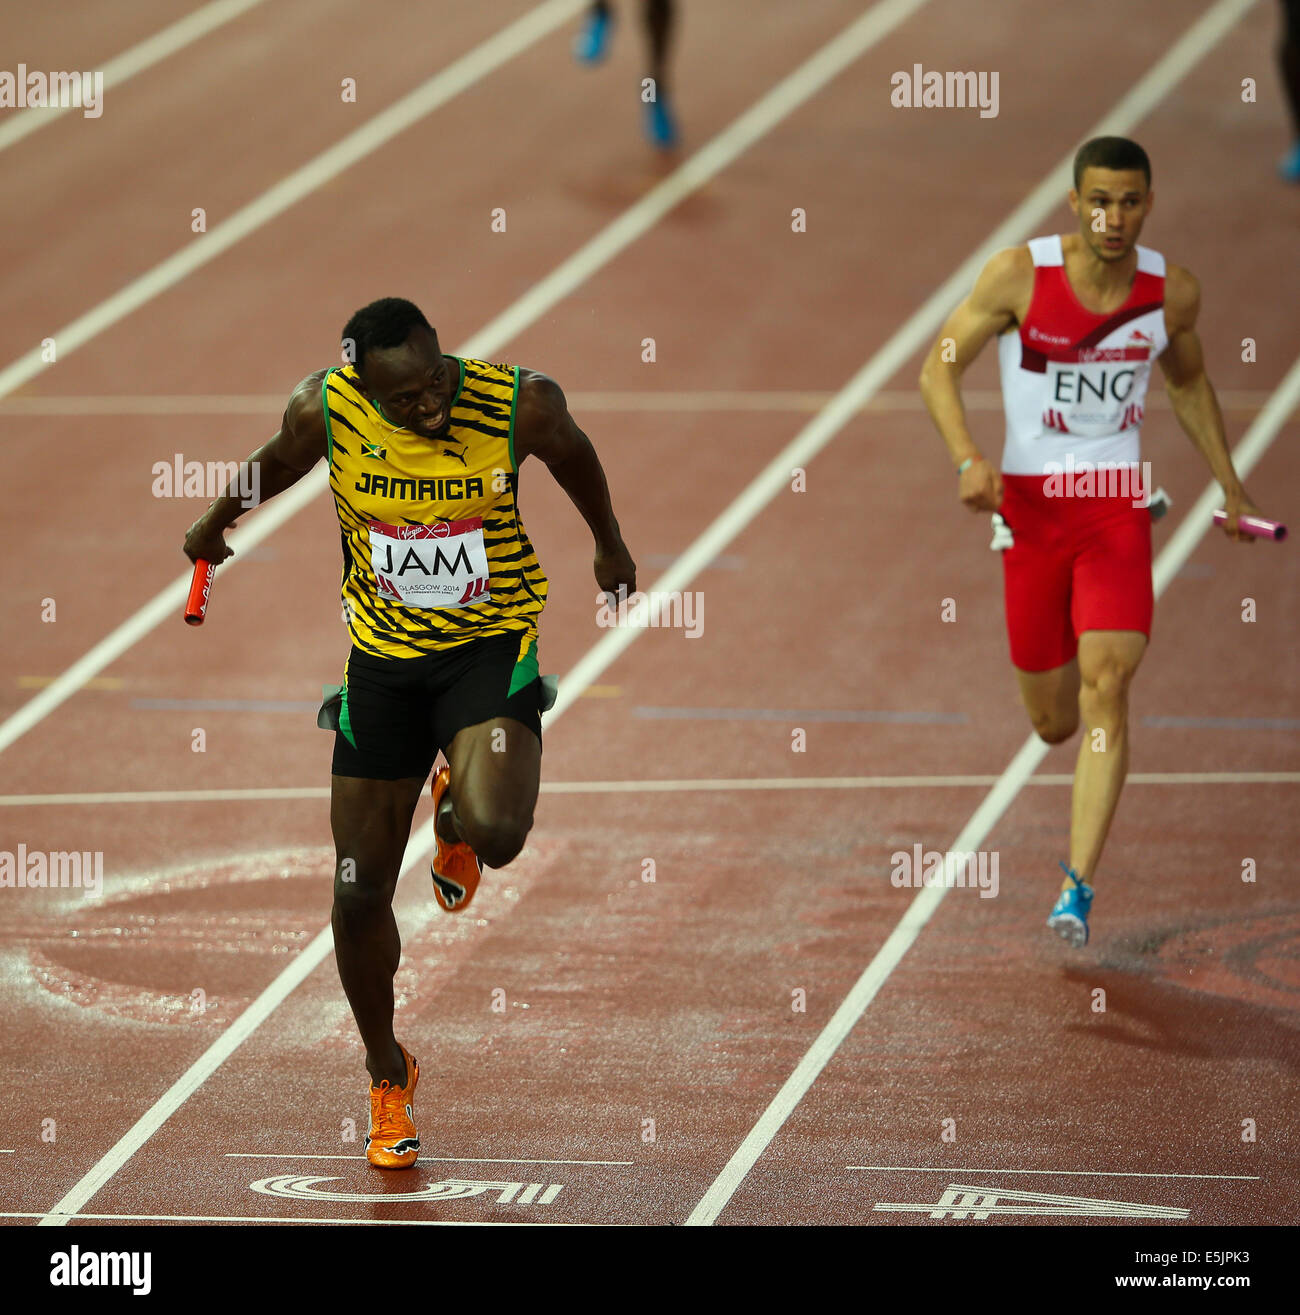 Hampden Park Glasgow 2 August 2014. Commonwealth Games Men's 4x100 final.  Usain Bolt brings home the baton for Jamaica in a new Games record time of 37.58.  England finished second in 38.02. Jamaican team - Jason Livermore; Kemar Bailey-Cole; Nickel Ashmeade and Usain Bolt. Danny Talbot ENG follows behind in second Stock Photo